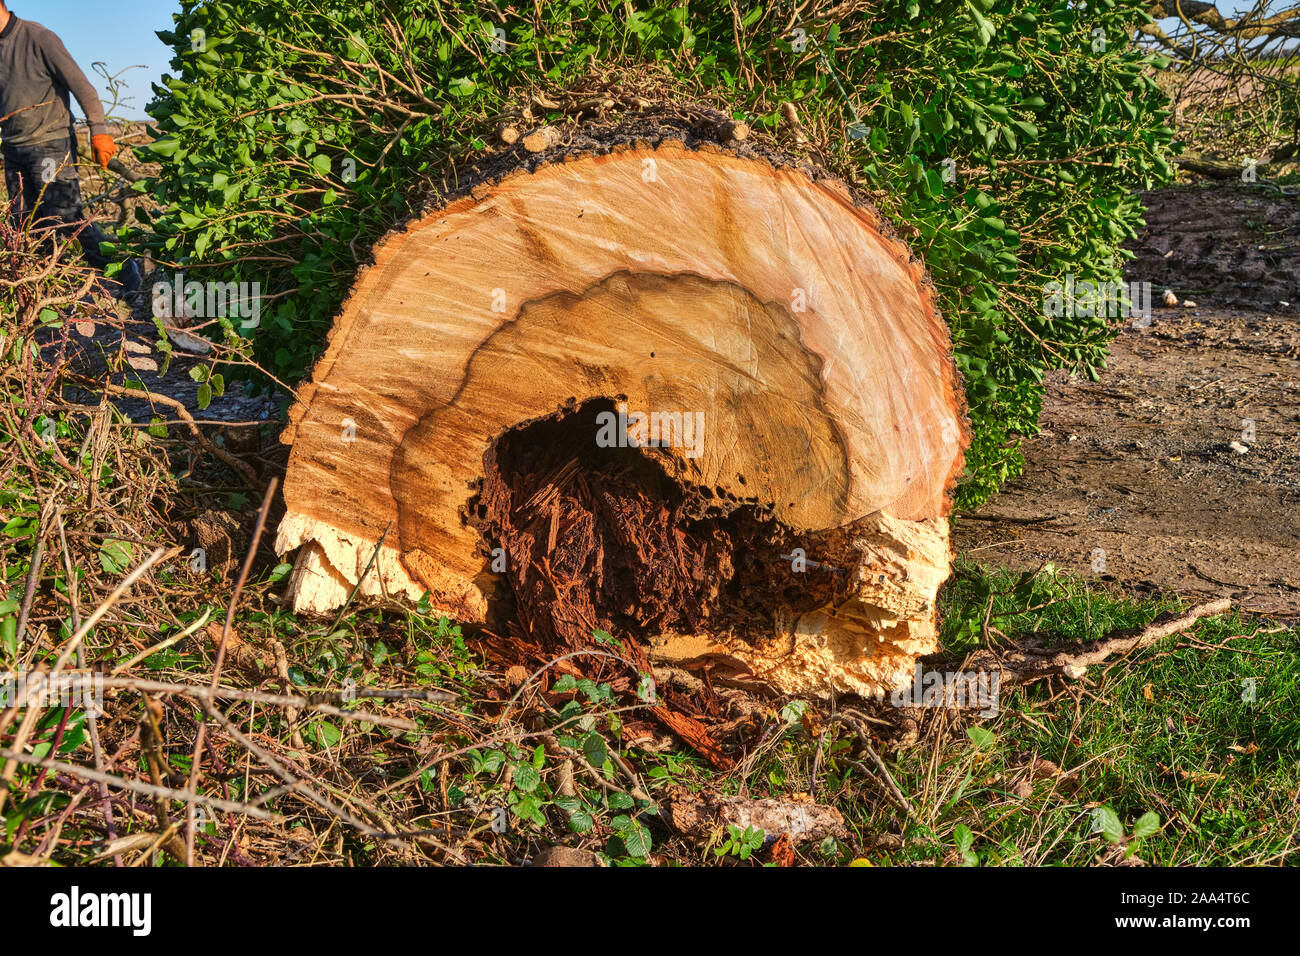 A cross section of a recently felled diseased Ash tree Fraxinus excelsior exhibiting Heart rot fungal disease that causes decay in the centre of trunk Stock Photo